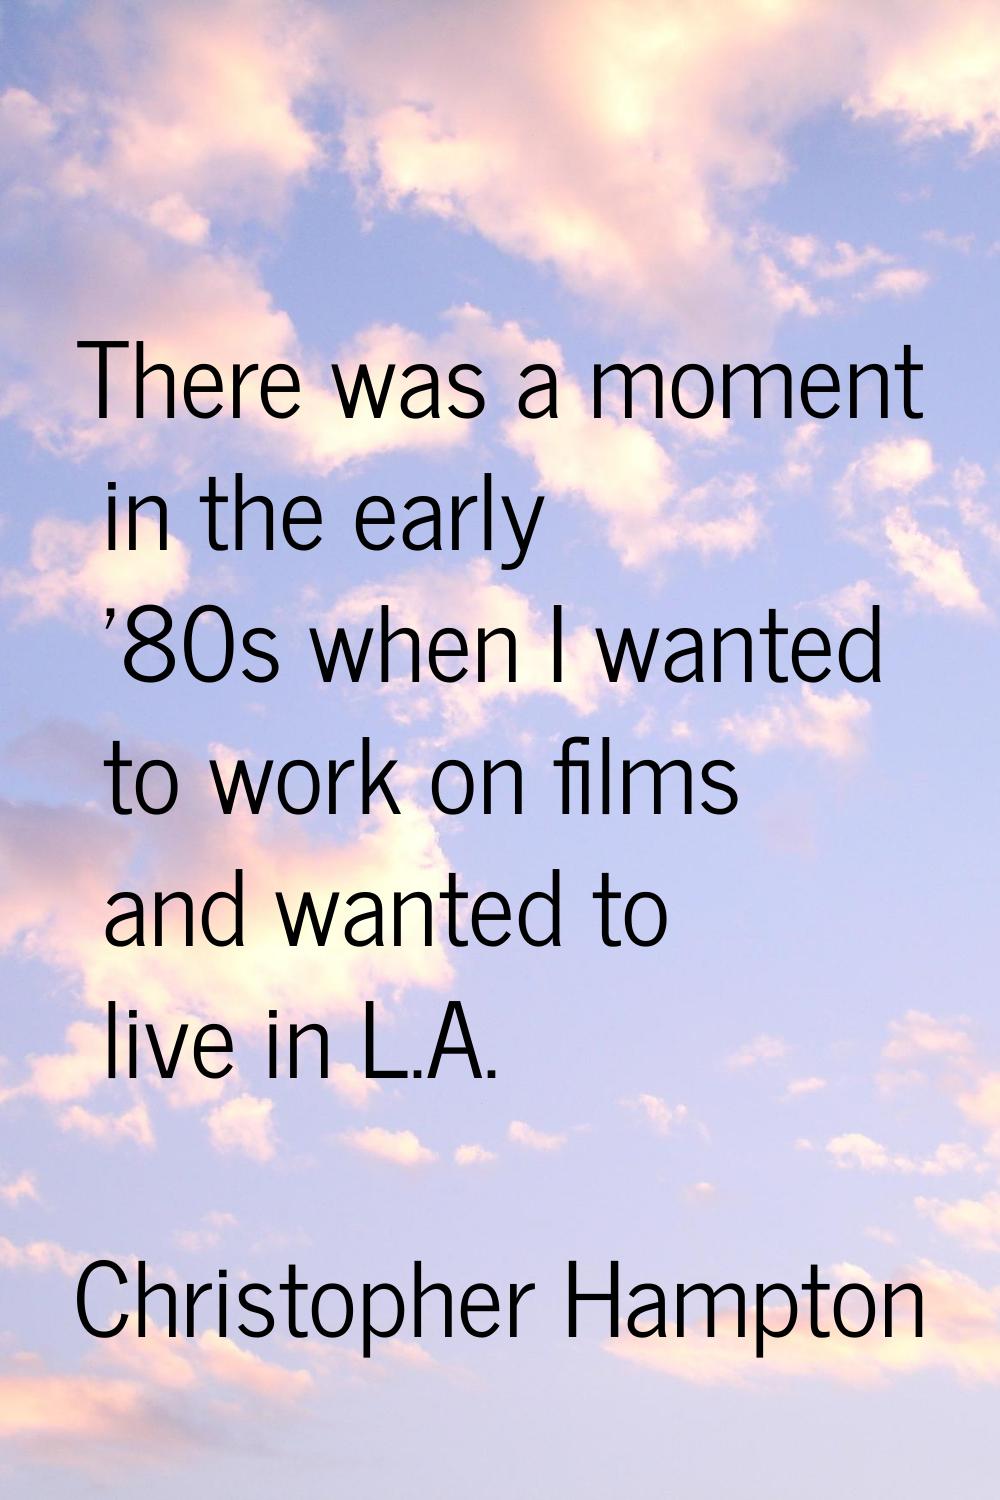 There was a moment in the early '80s when I wanted to work on films and wanted to live in L.A.